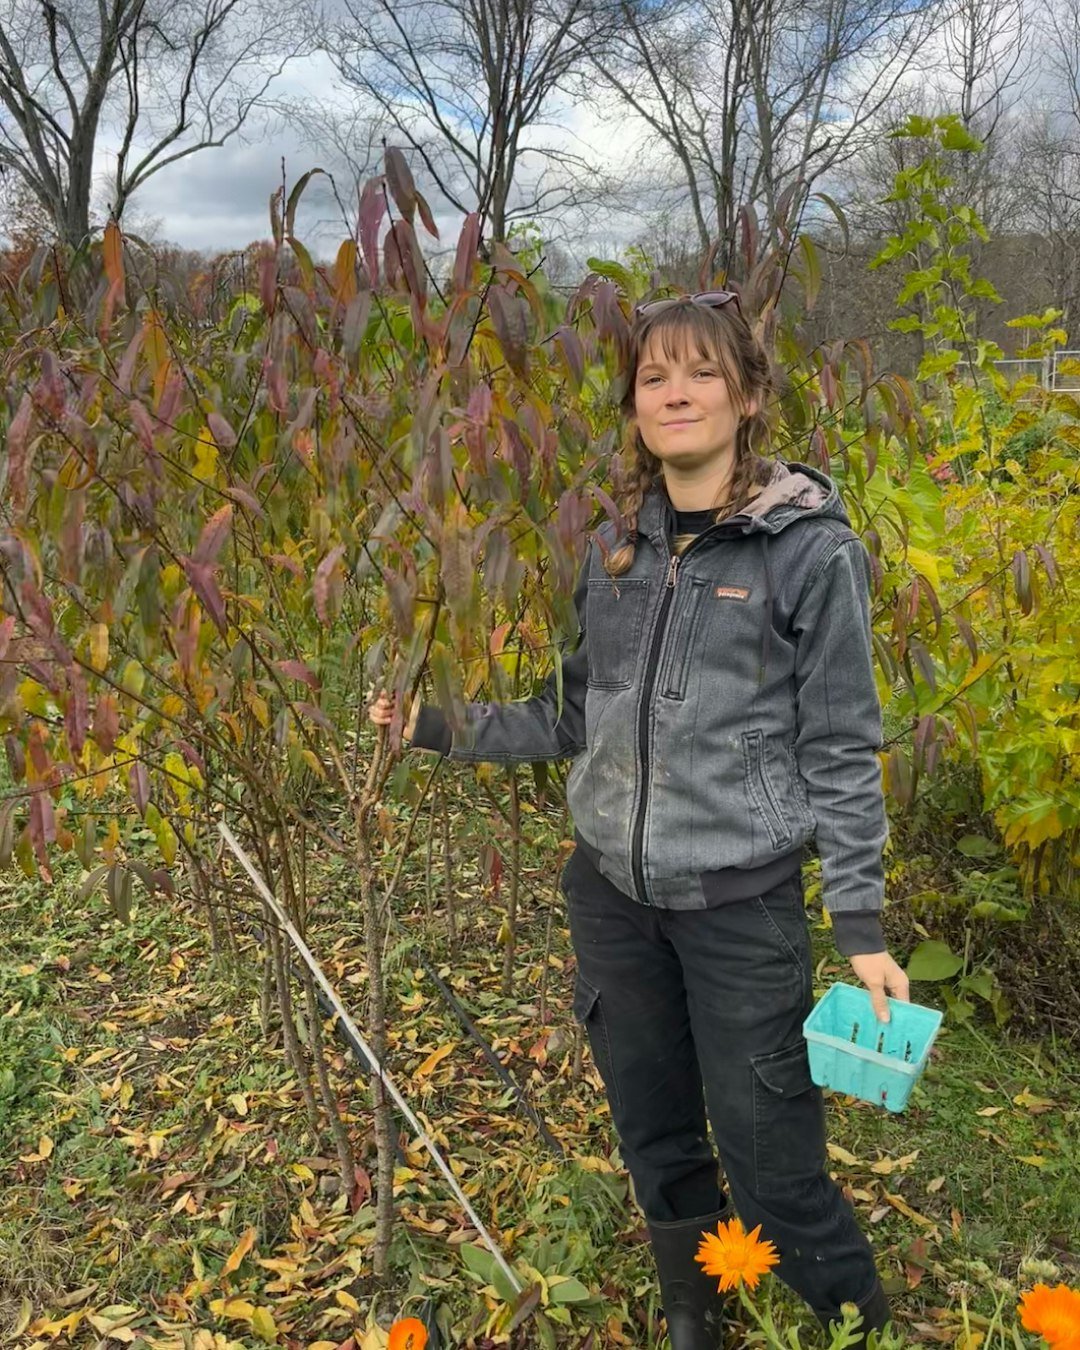 Crow Hill Nursery is a native &amp; perennial-focused nursery in Ancram, NY that has options for your garden that you didn't even know you needed - from classic garden vegetables &amp; flowers to hybrid chestnuts, cultivar hickories, berries, bramble